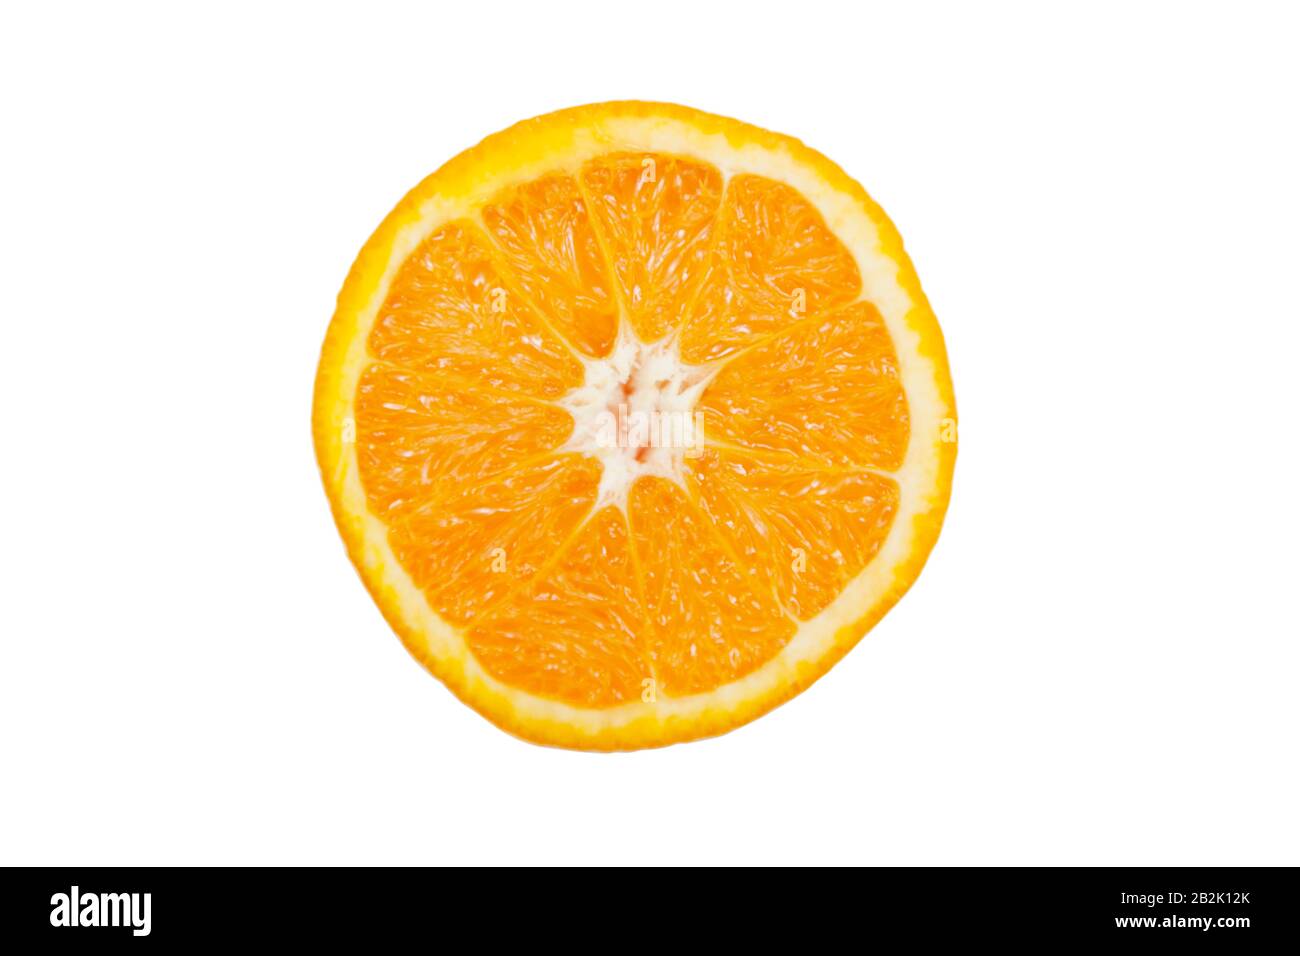 Cross section of sliced pulpy orange against white background Stock Photo